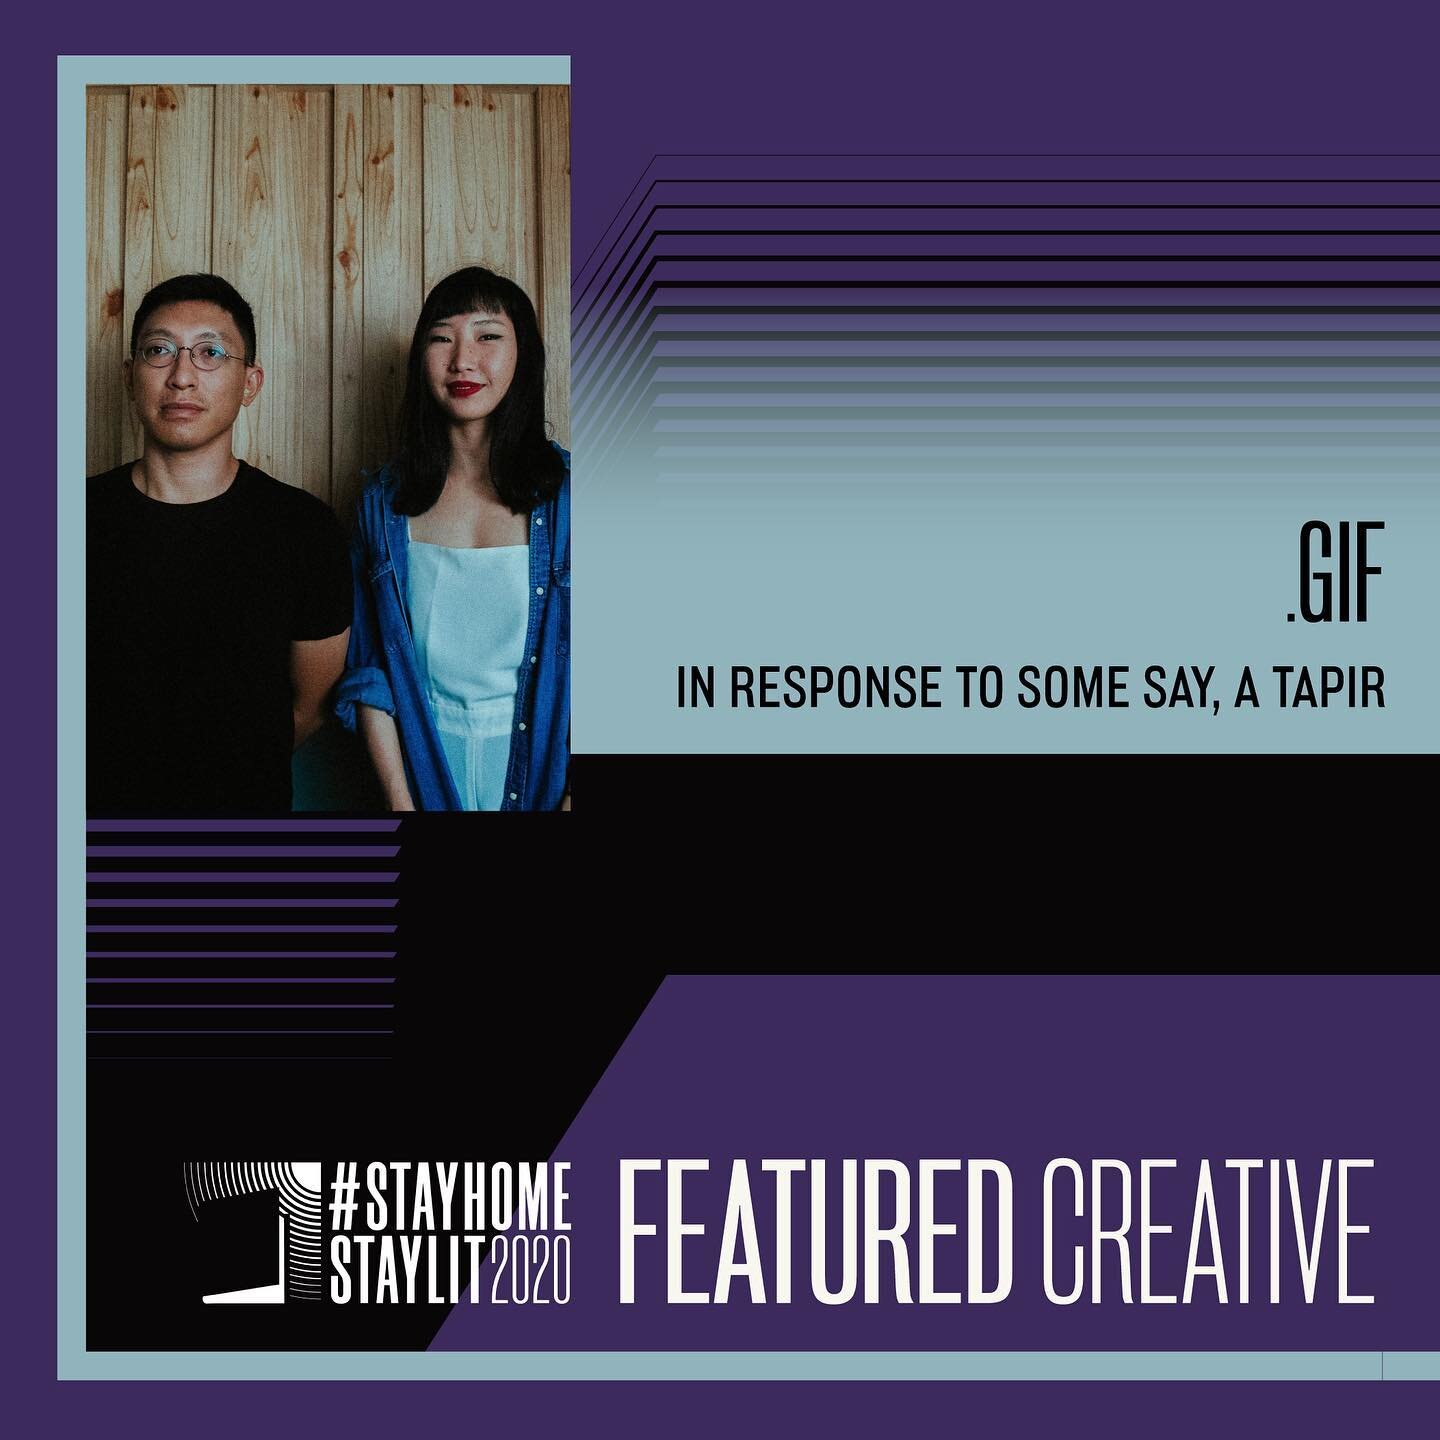 Entranced by the hypnotising beats that have piqued your interest? Find out the inspiration behind this riveting melody  from musician gif (@dotgifdotgif).⁣⁣
⁣⁣
We're big fans of Sing Lit and Deborah and love collaborating outside of music, so this w